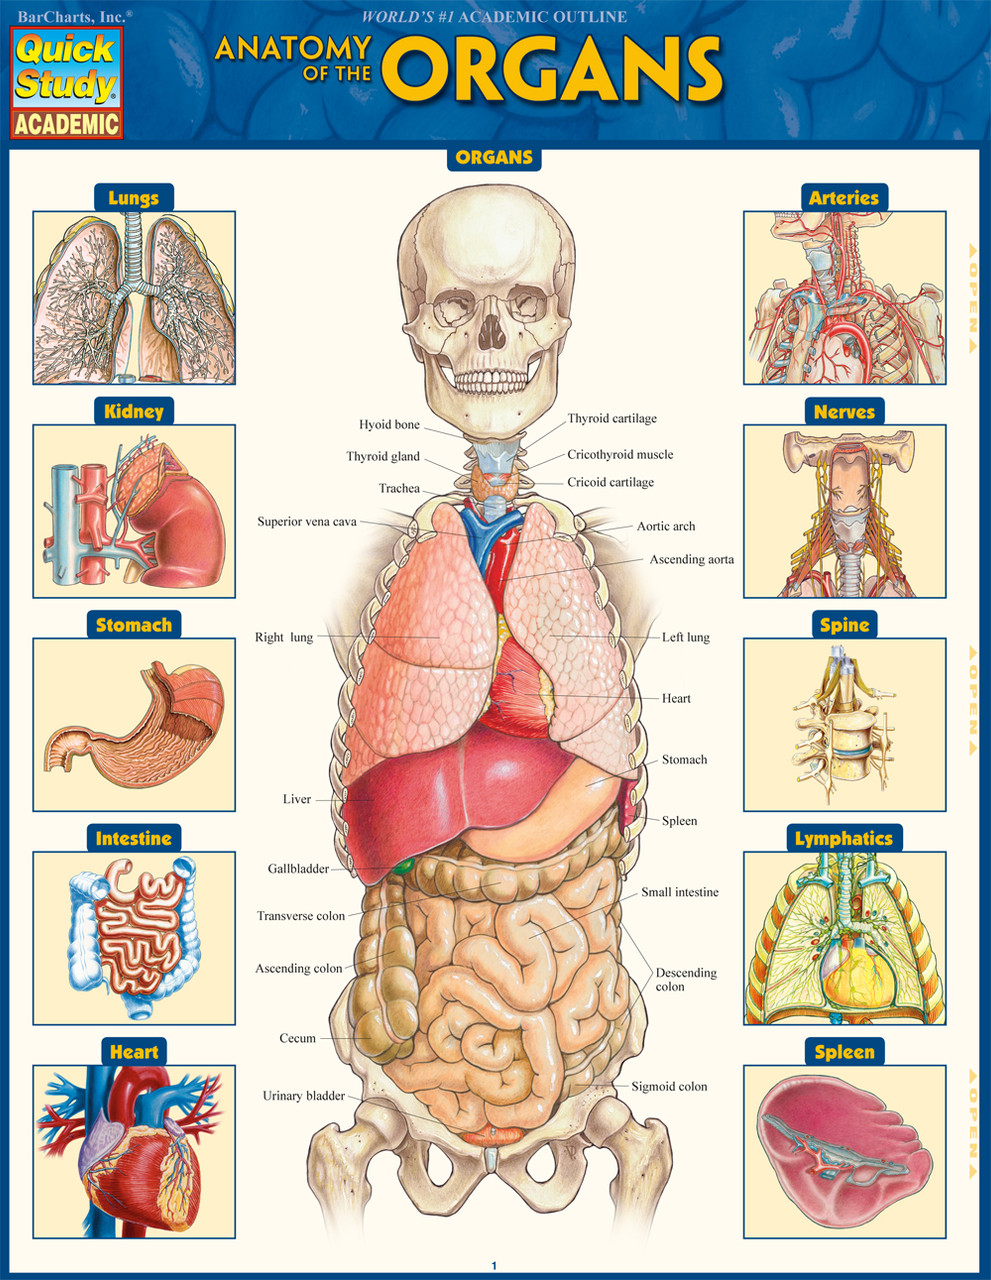 QuickStudy Anatomy of the Organs Laminated Study Guide (9781423234630)